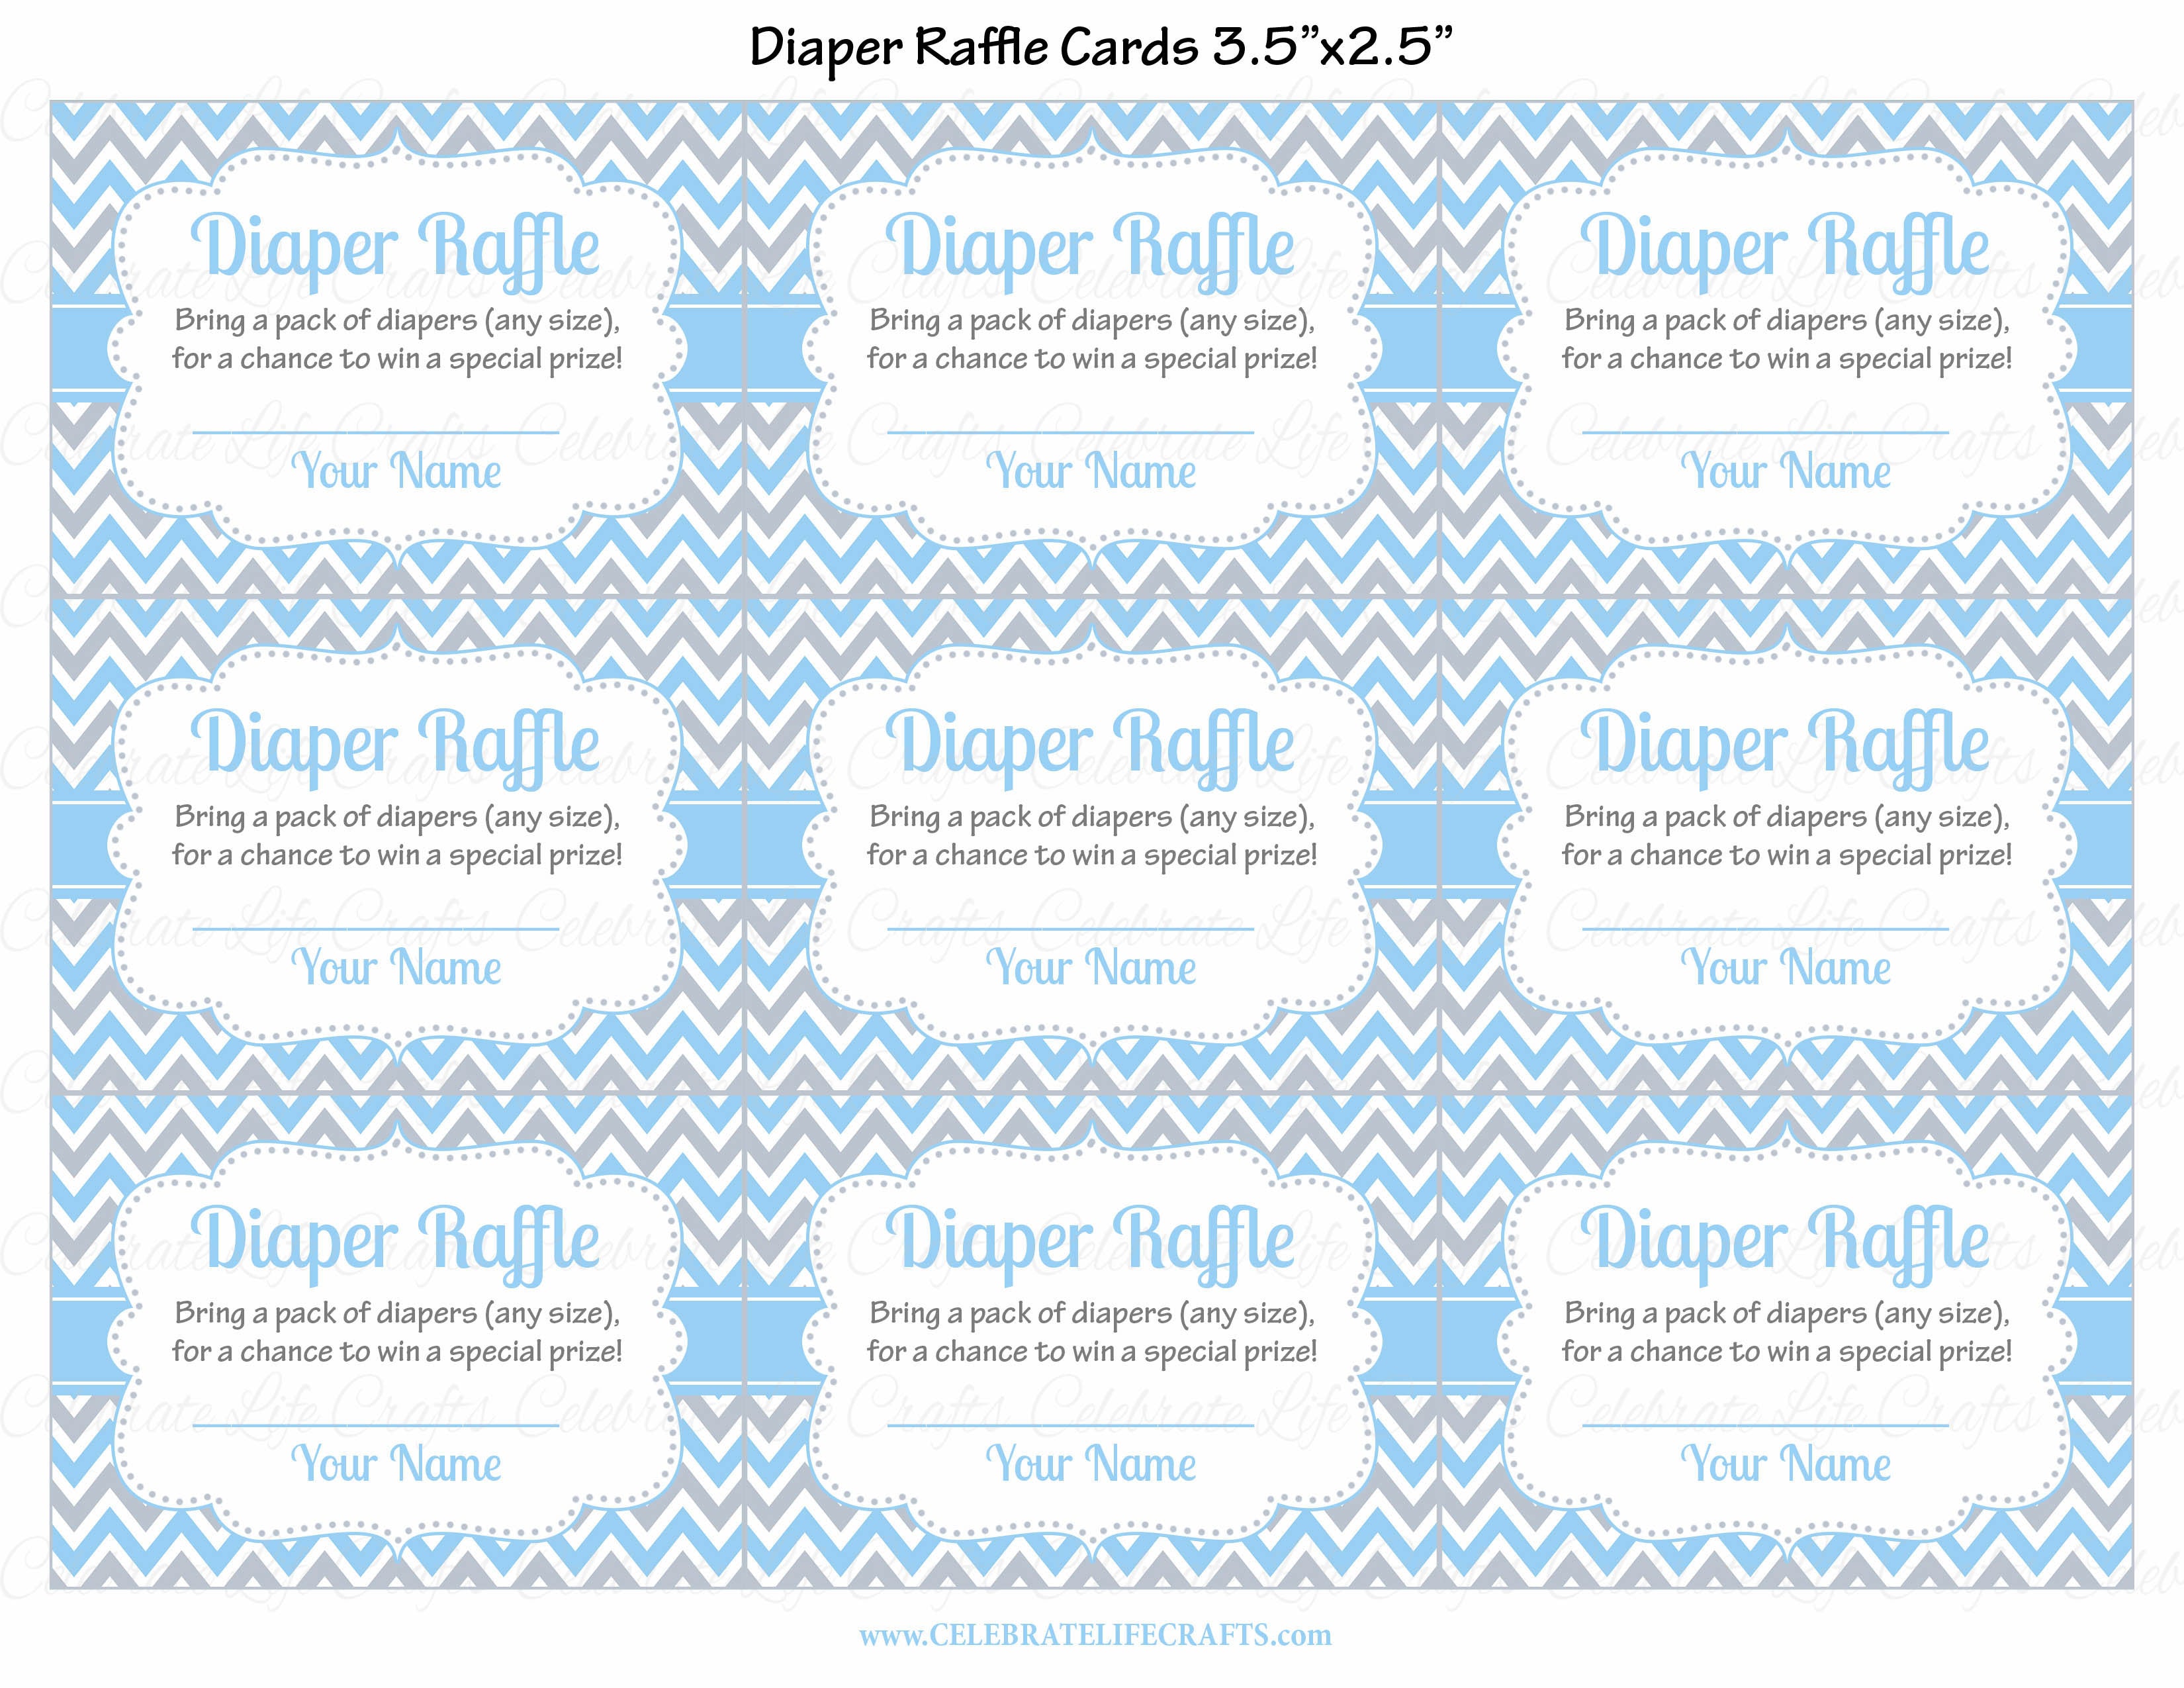 Free Diaper Raffle Ticket Printables Customize and Print